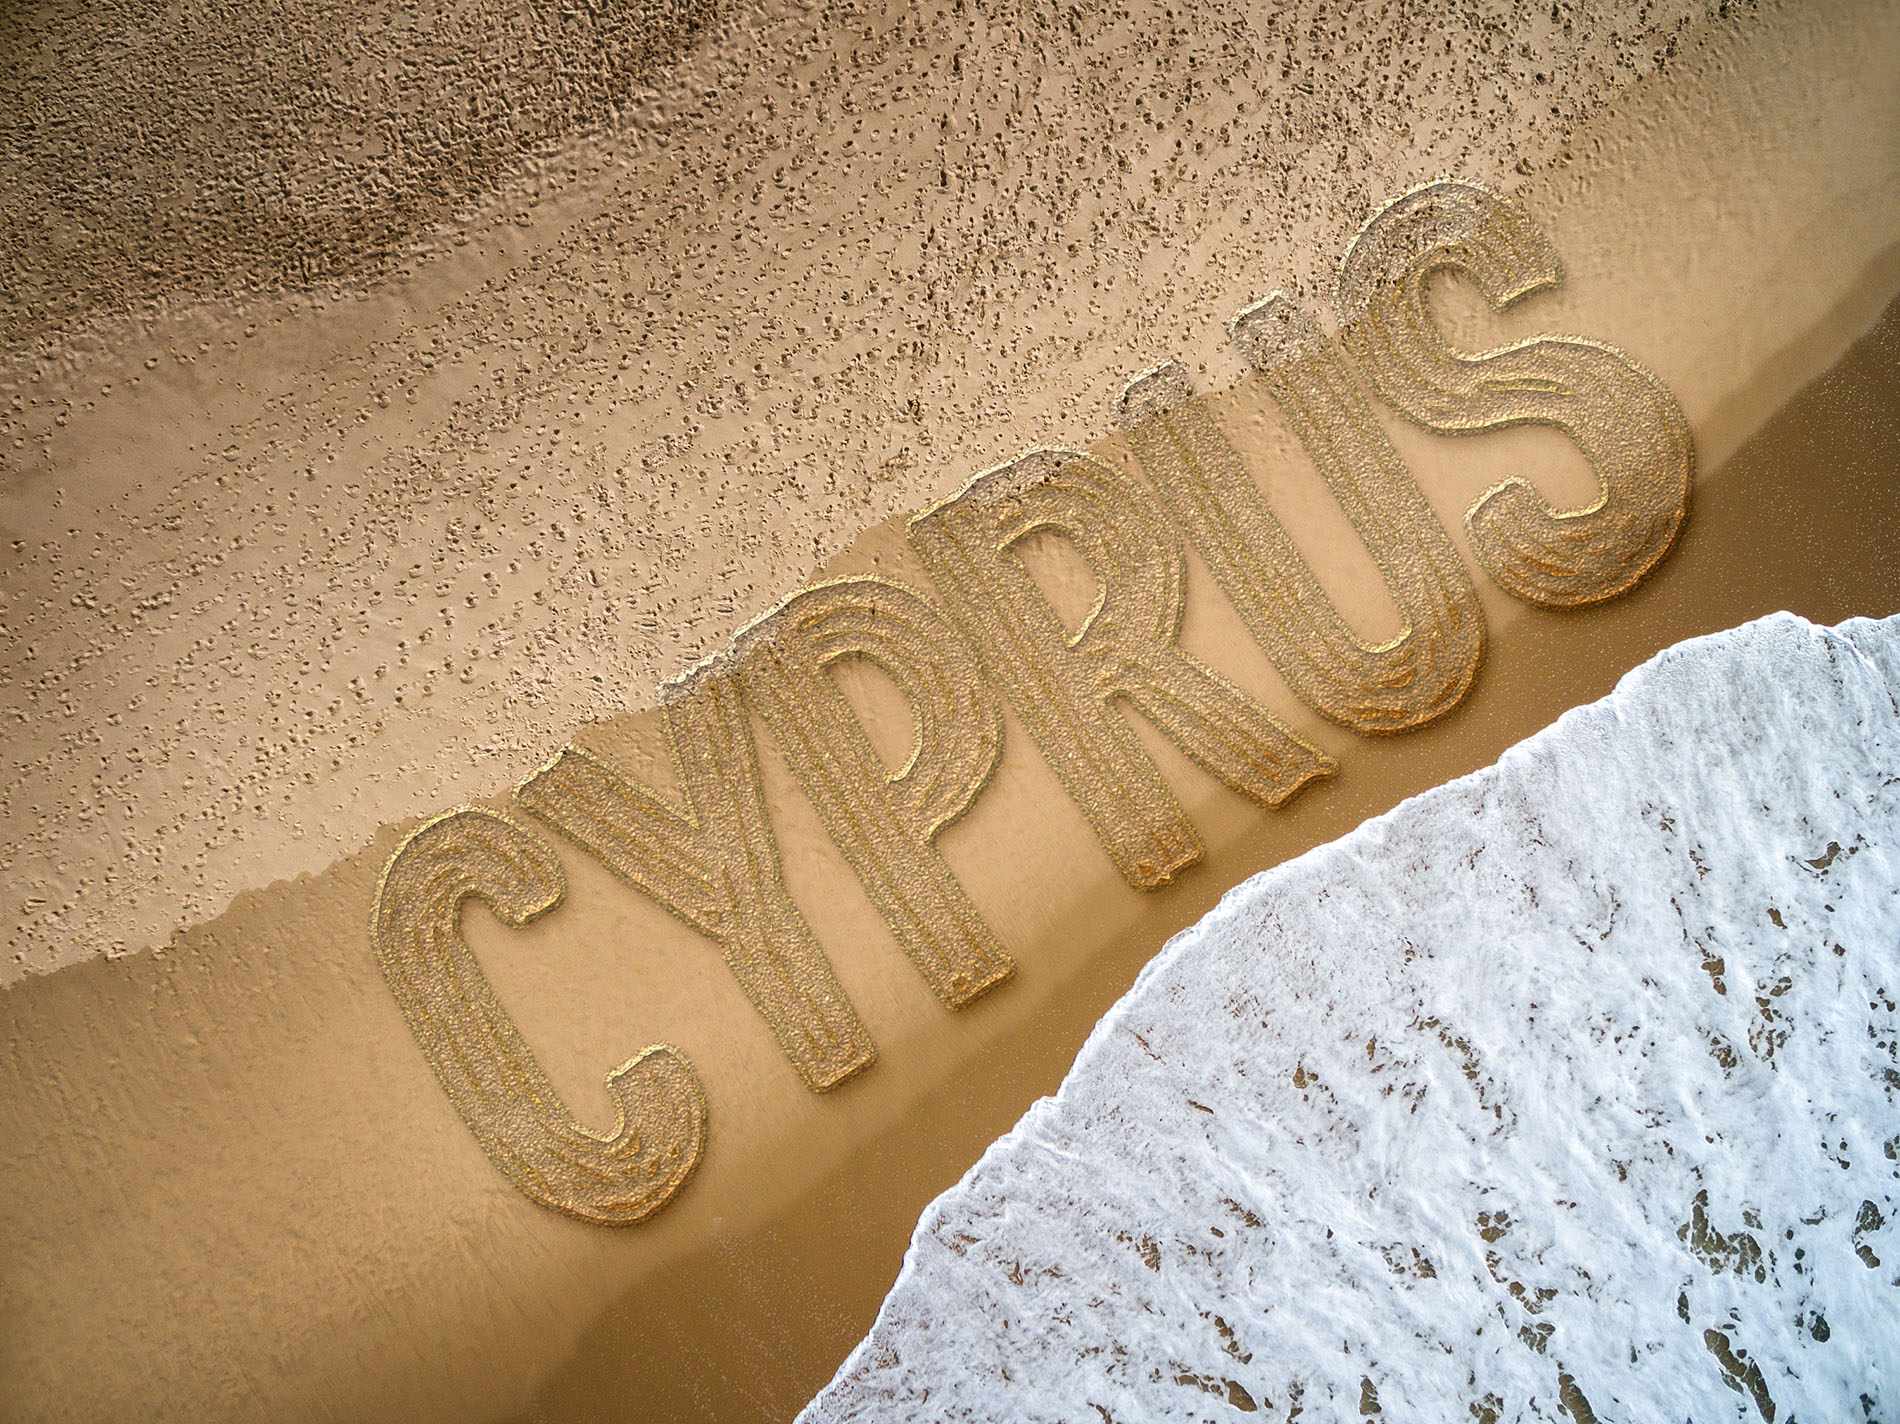 Travelling To Cyprus?